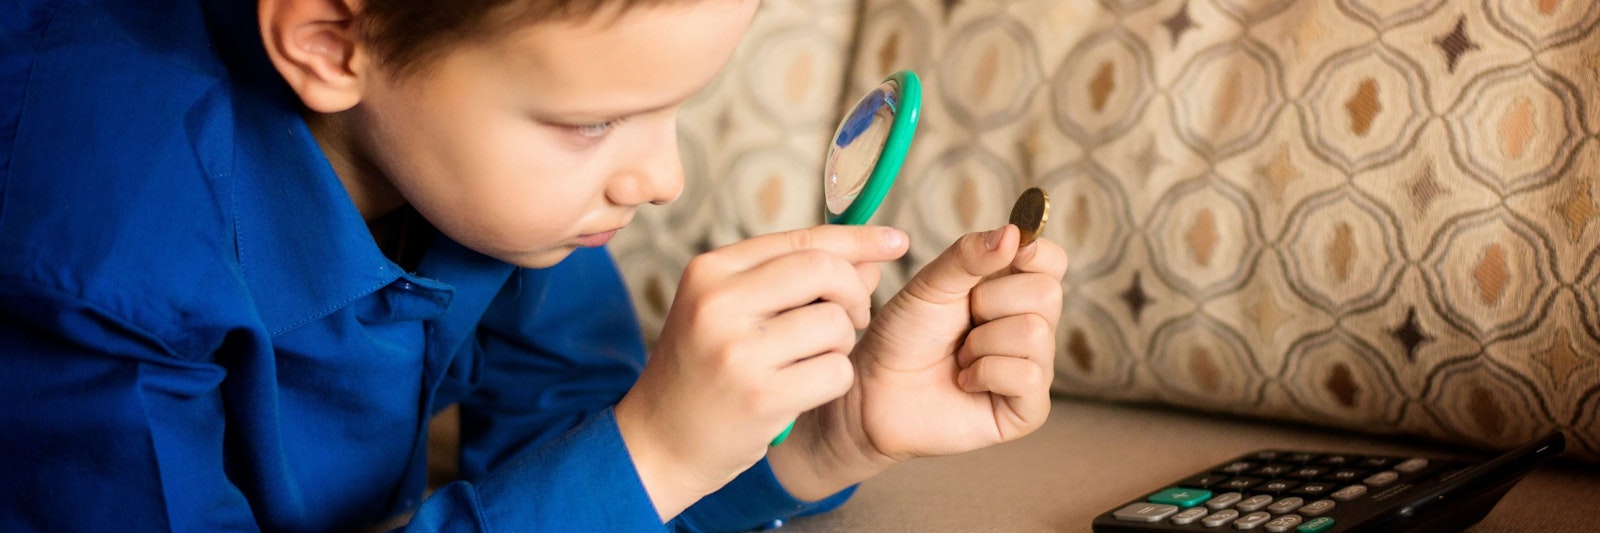 Student using magnifying glass